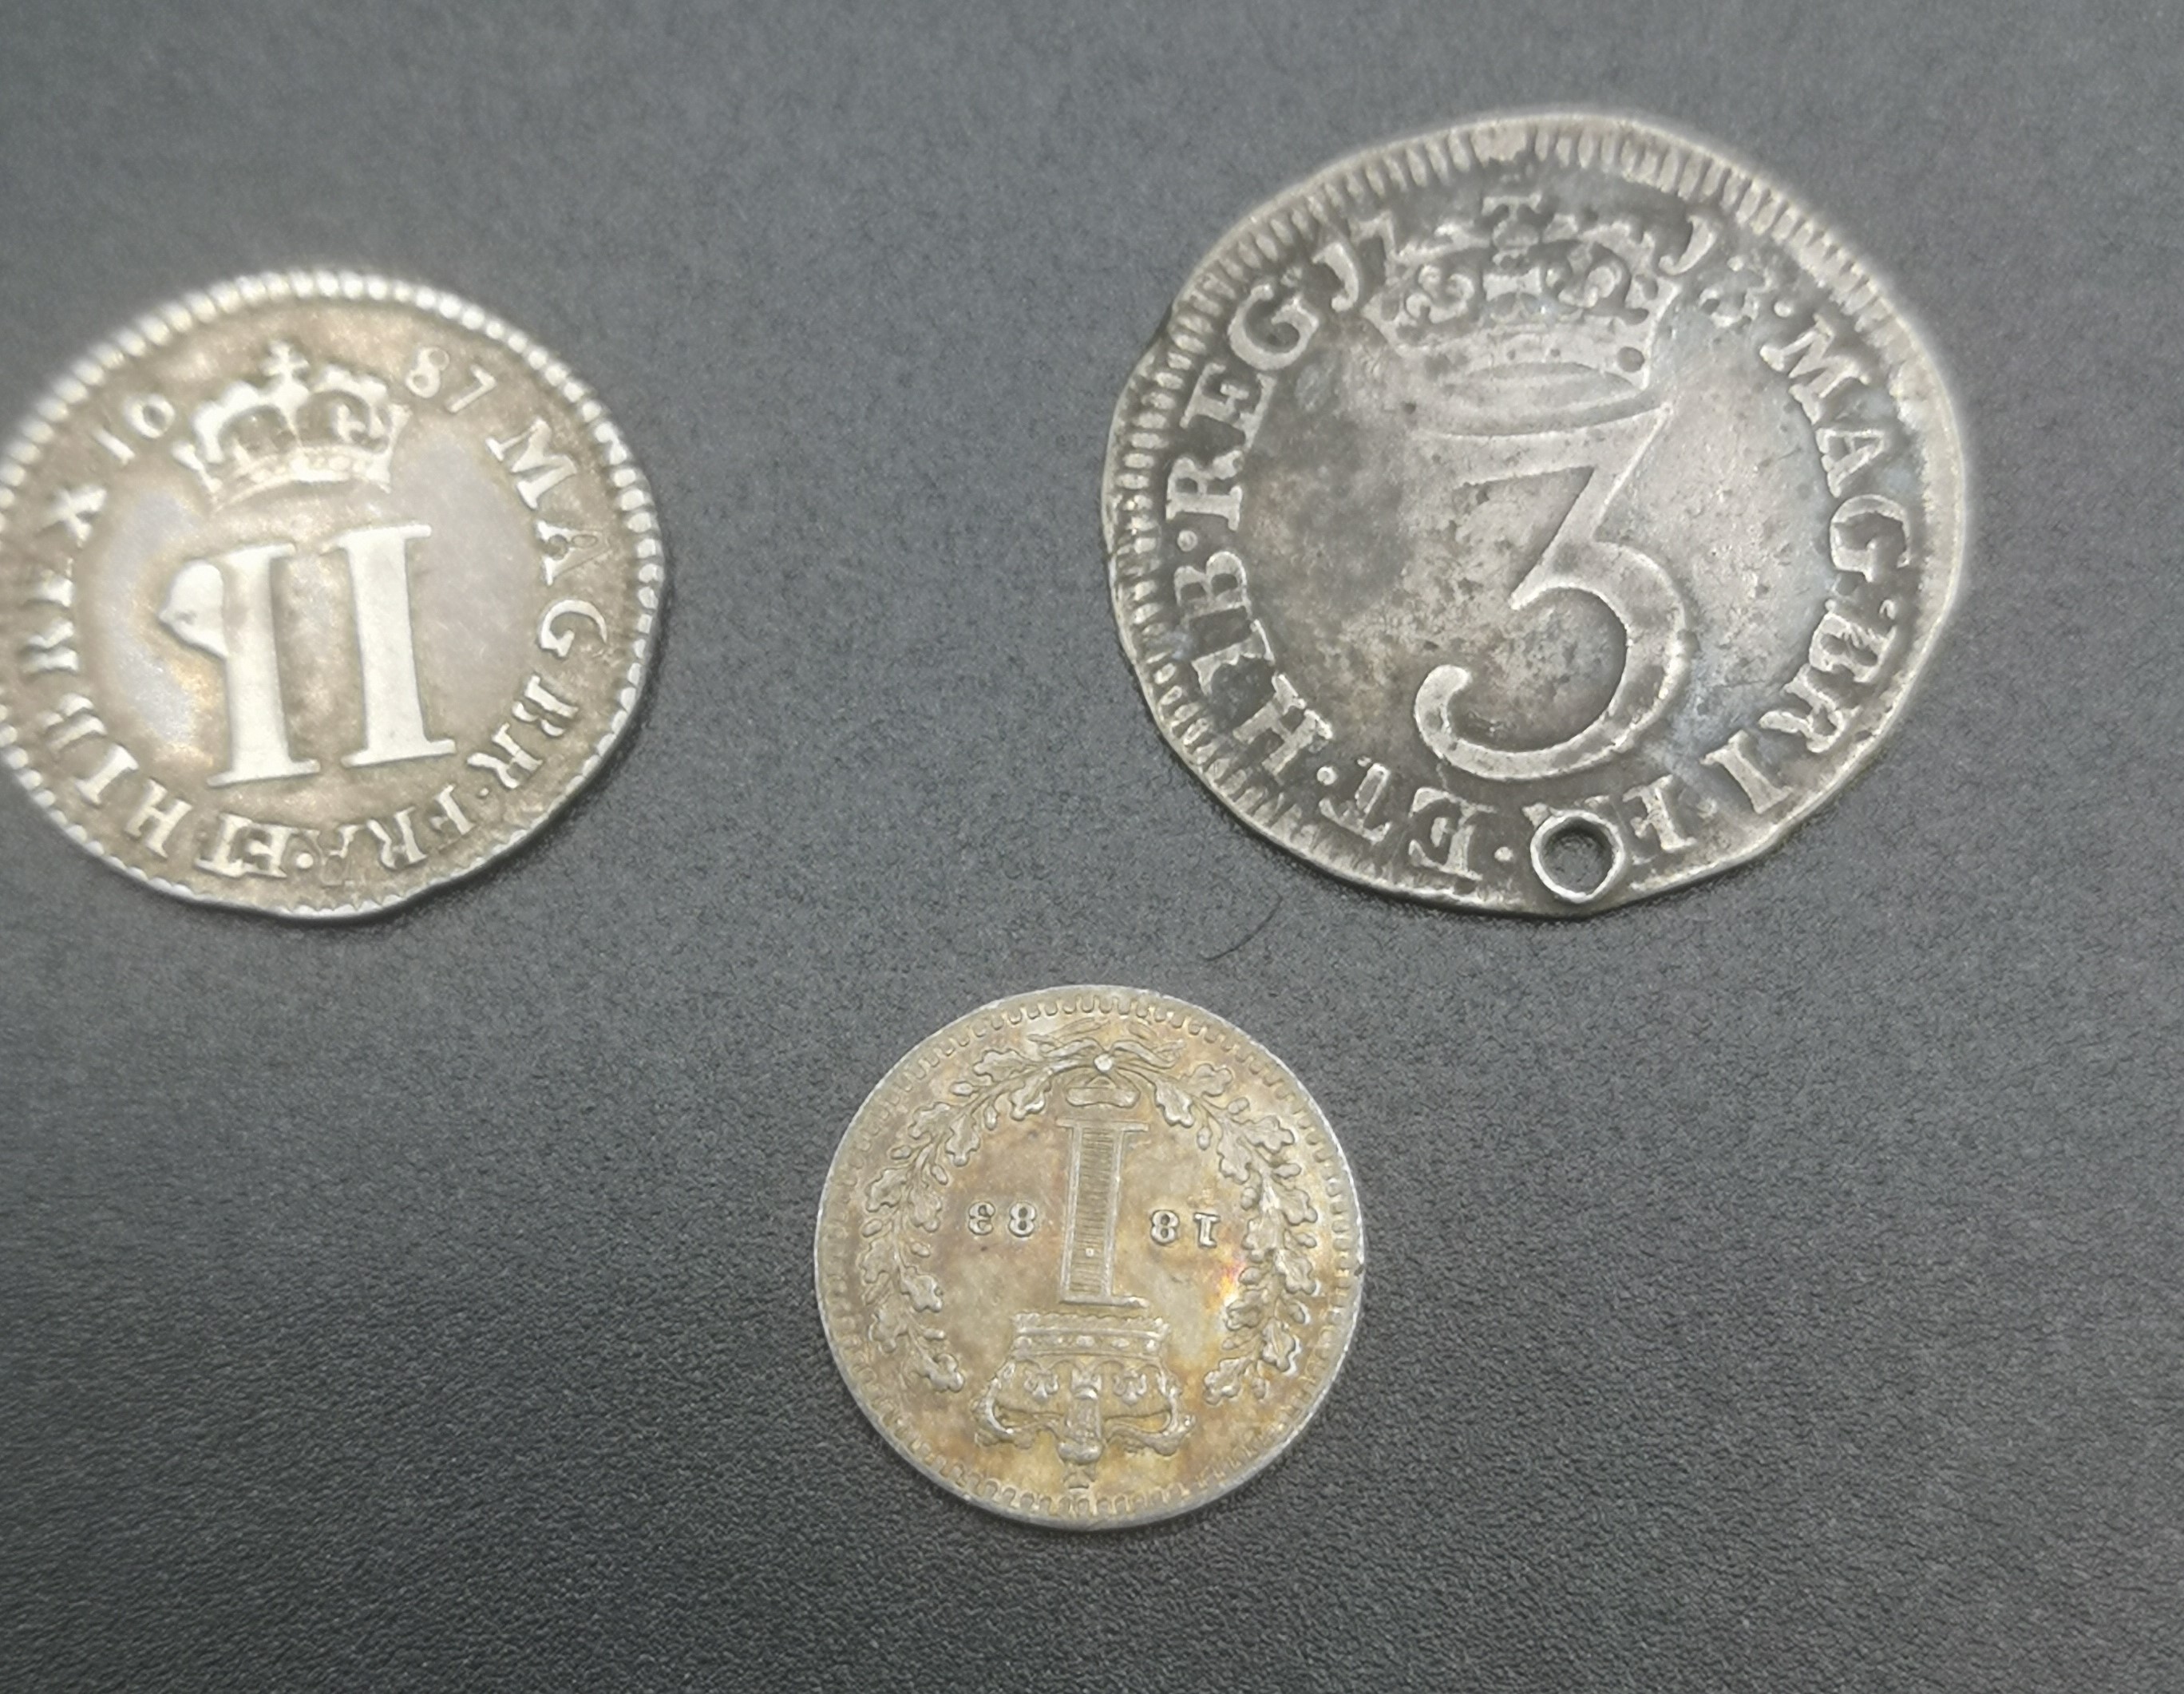 17th, 18th and 19th century Maundy coins - Image 3 of 6